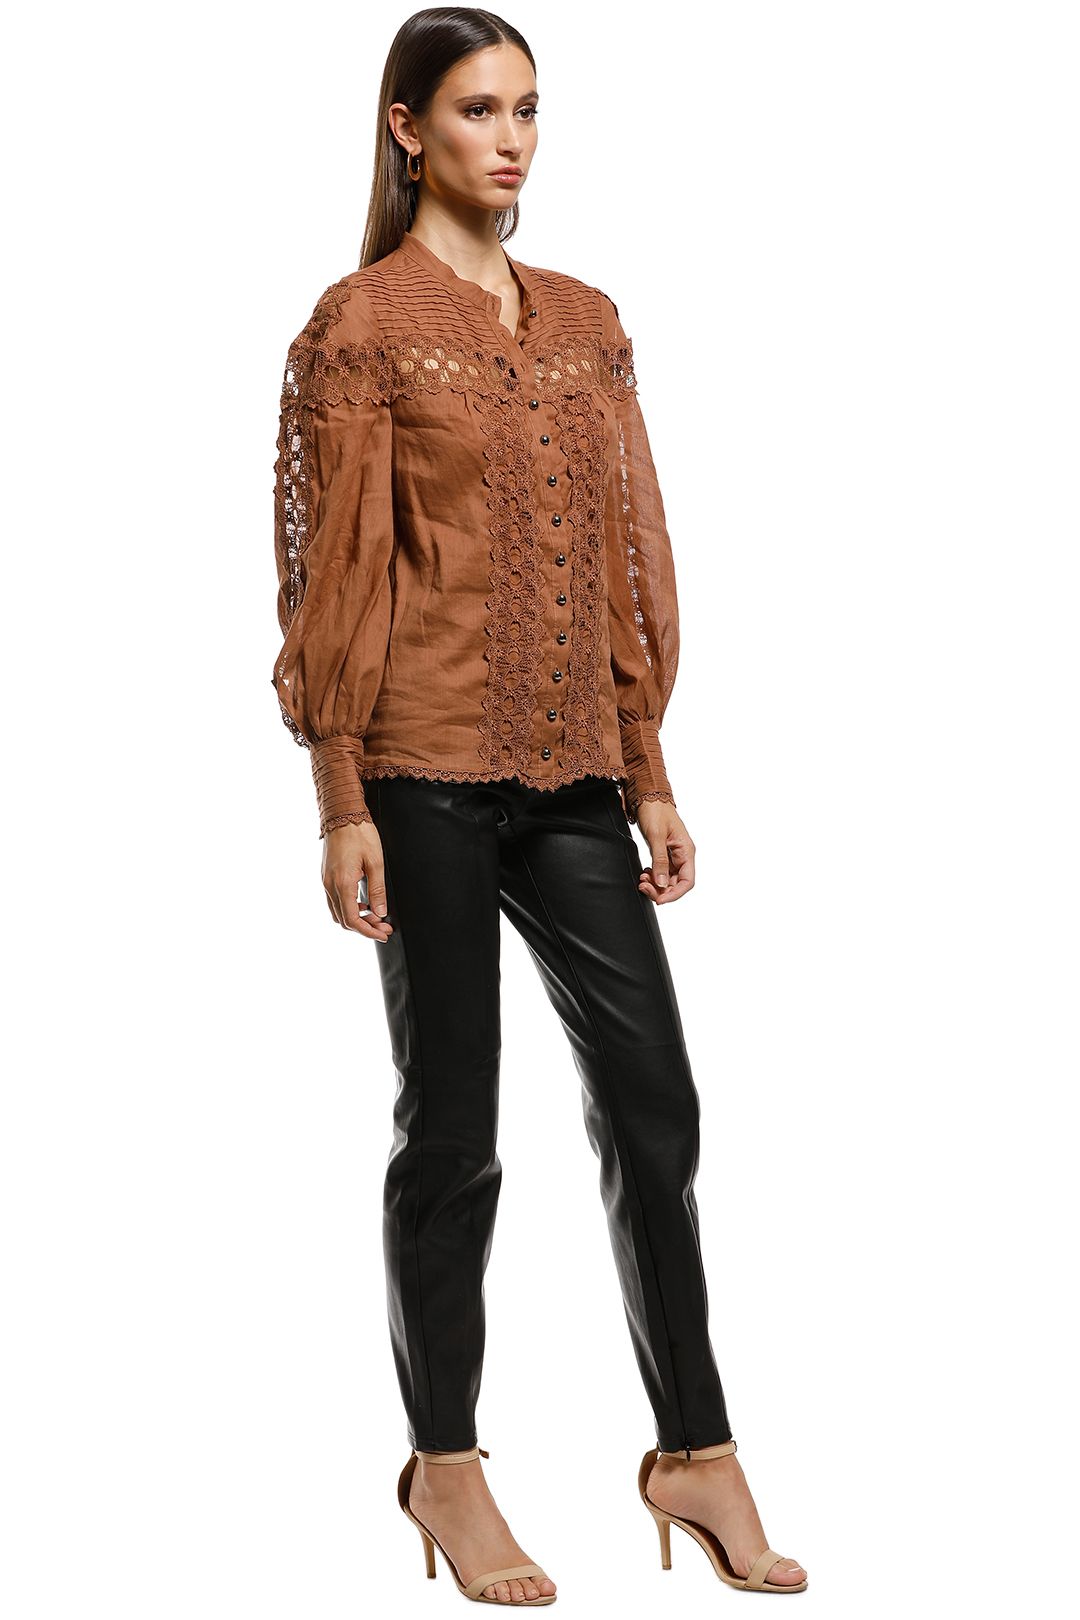 Ministry of Style - Rumour Top - Walnut - Side